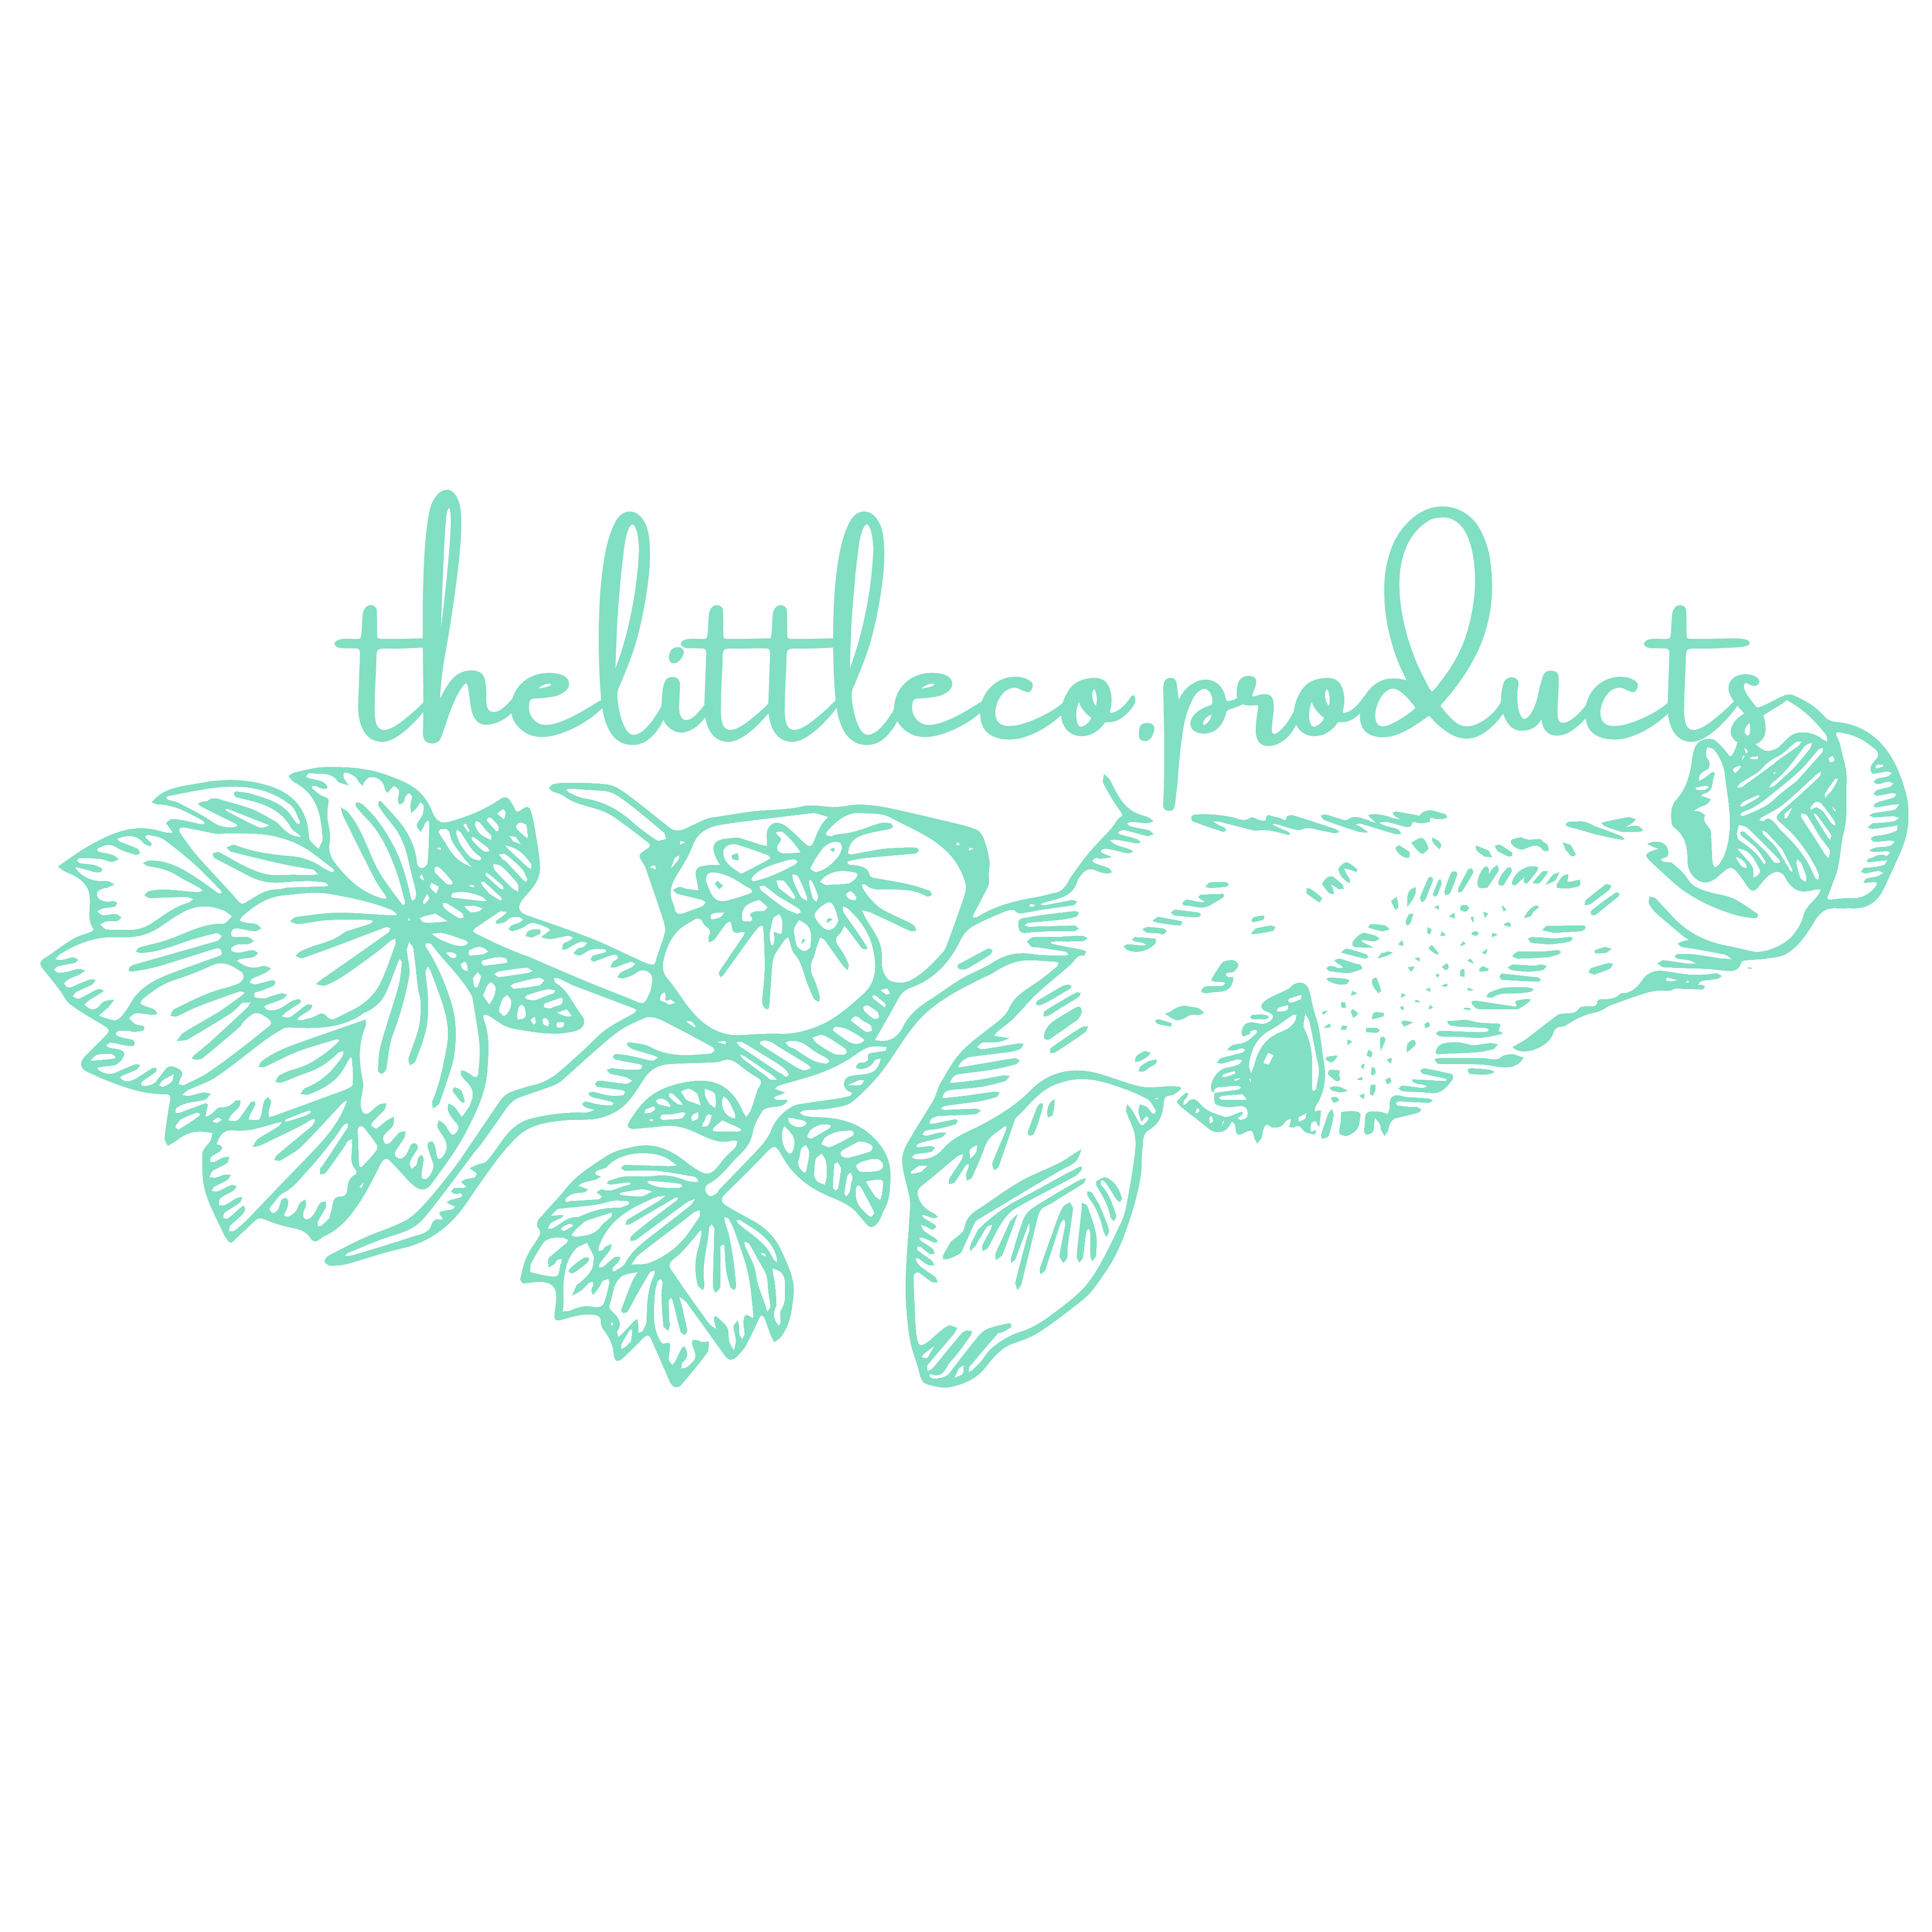 thelittleco.products